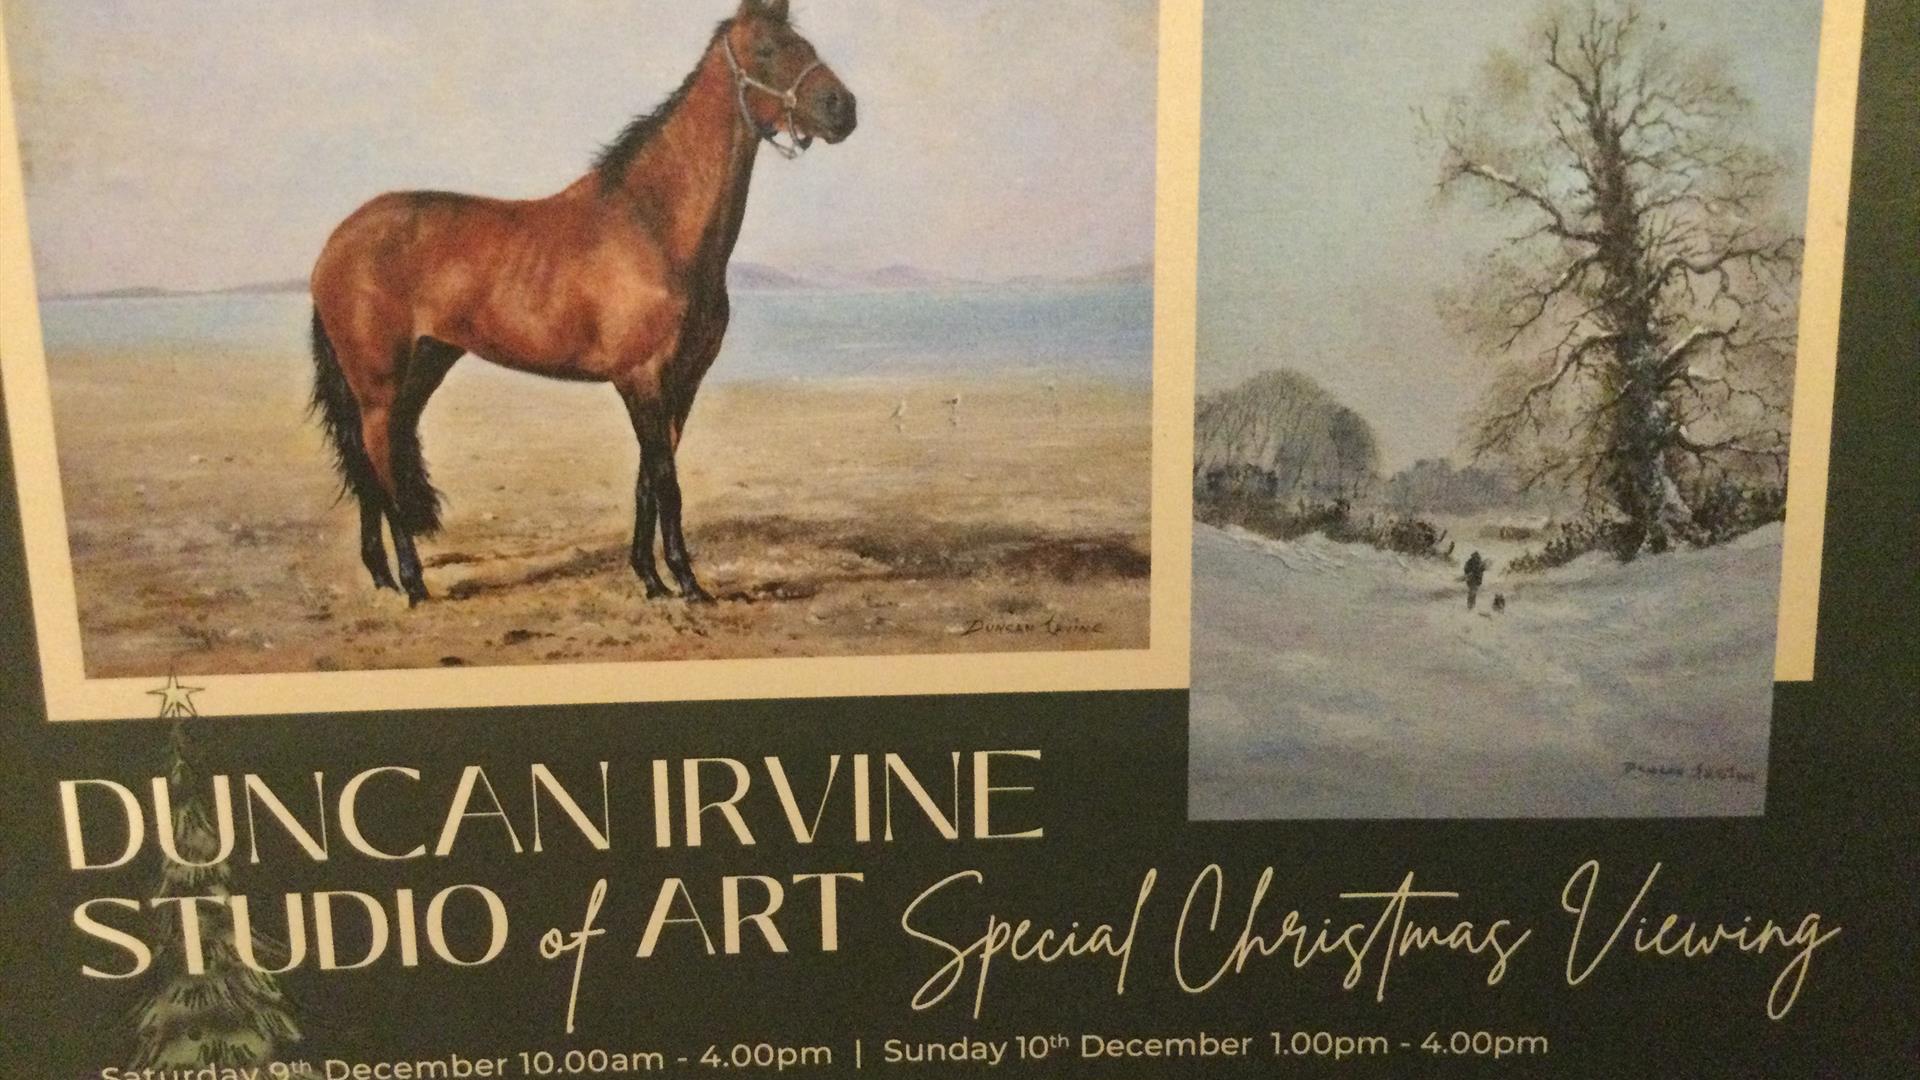 Oil on canvas, this racing horse was painted after watching the animal train on Rathmullan beach. The crisp snow scene was painted on location in Scot